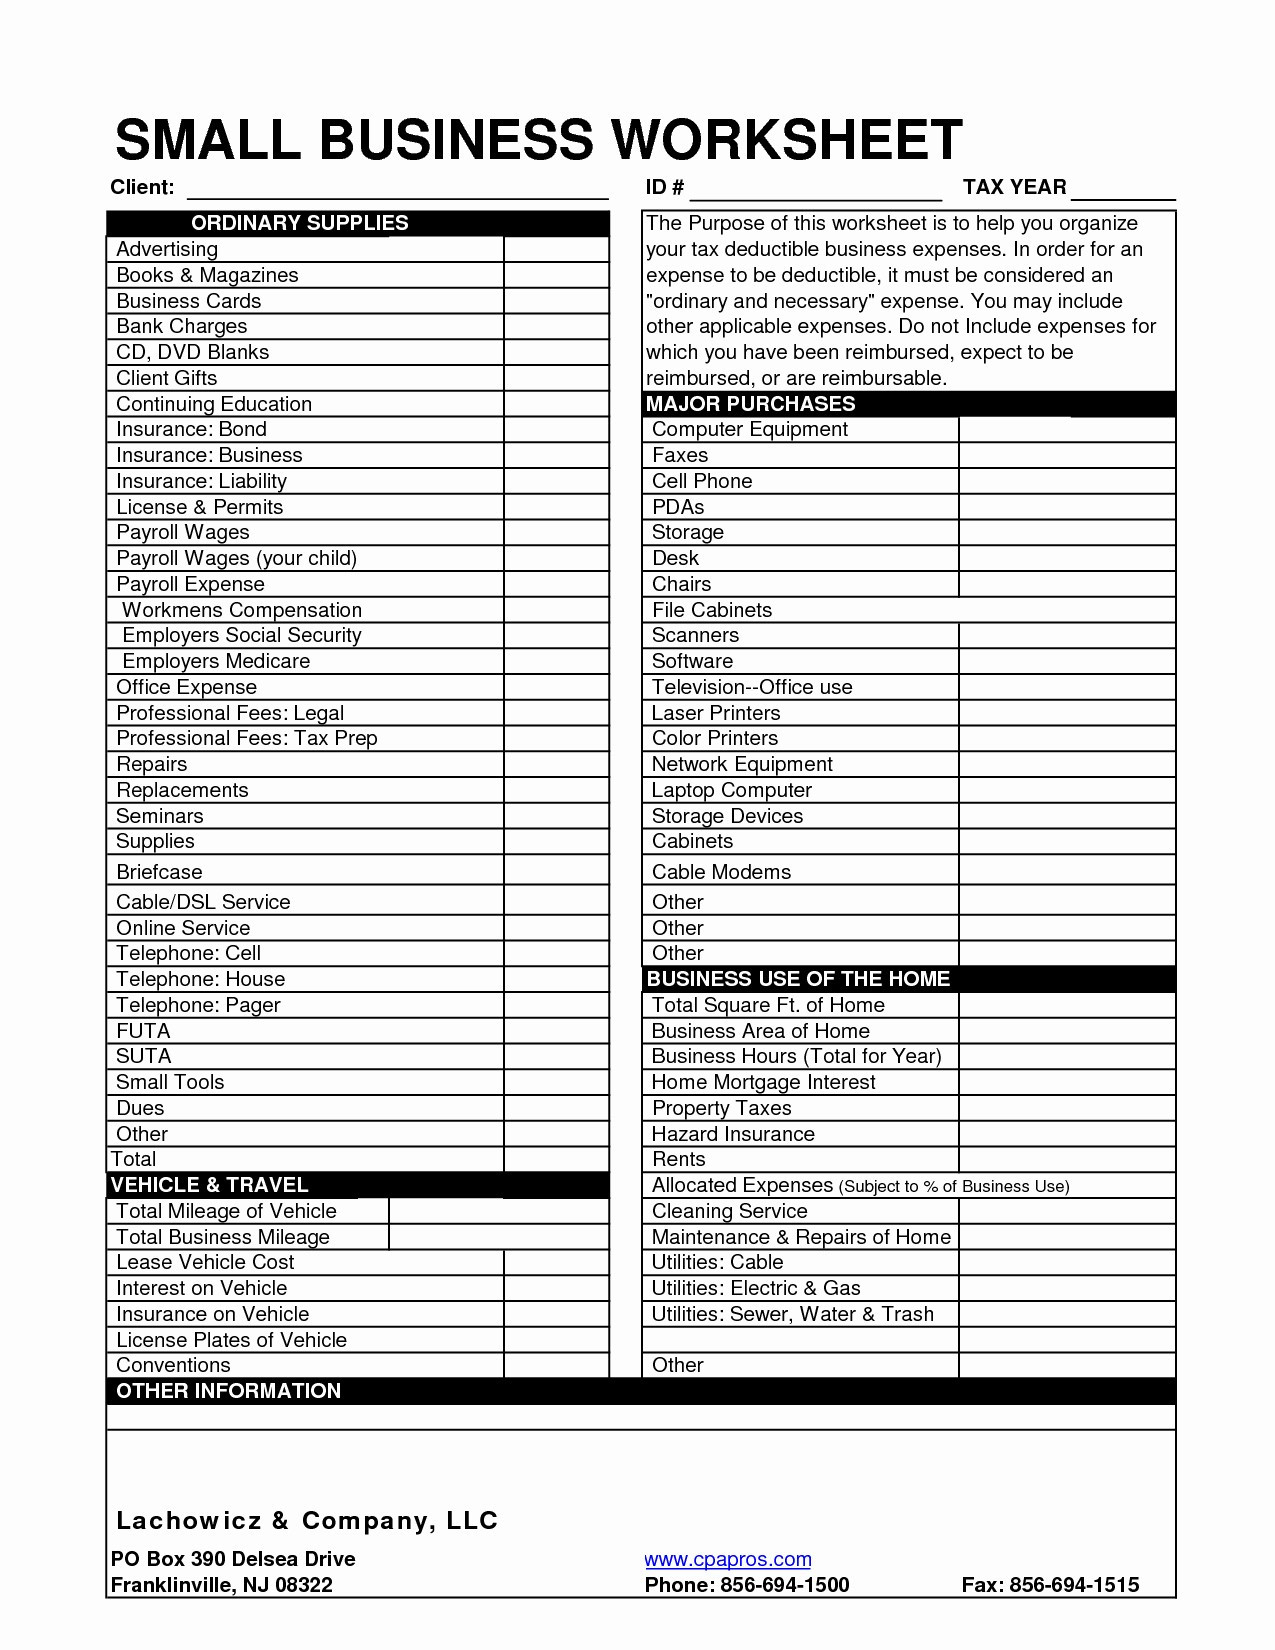 Business Spreadsheet For Taxes Intended For Small Business Tax Spreadsheet Template Valid Tax Deduction To Tax